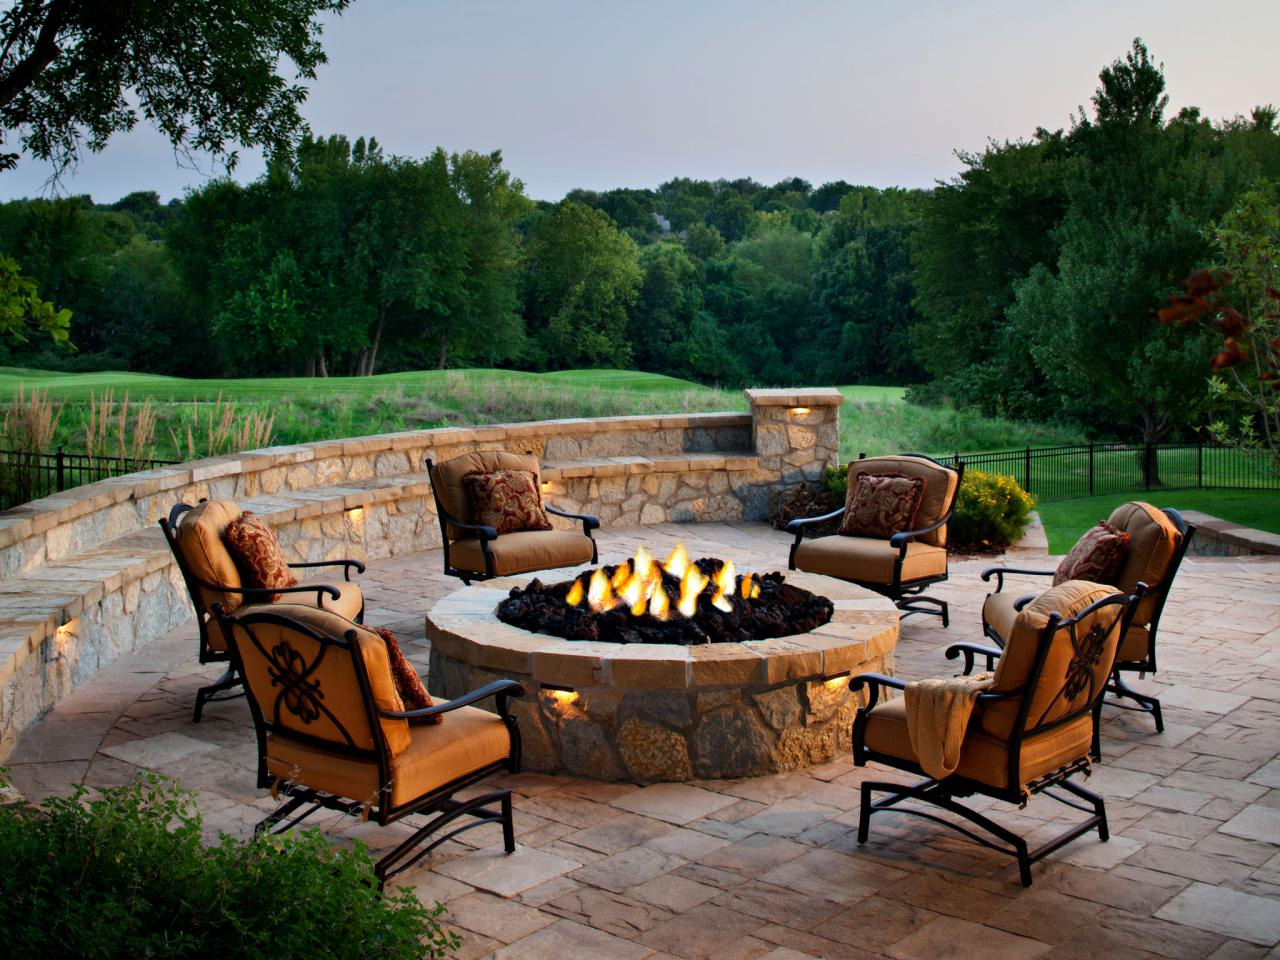 Fire Pits Expand Outdoor Living, Can You Have An Open Fire Pit In Your Backyard